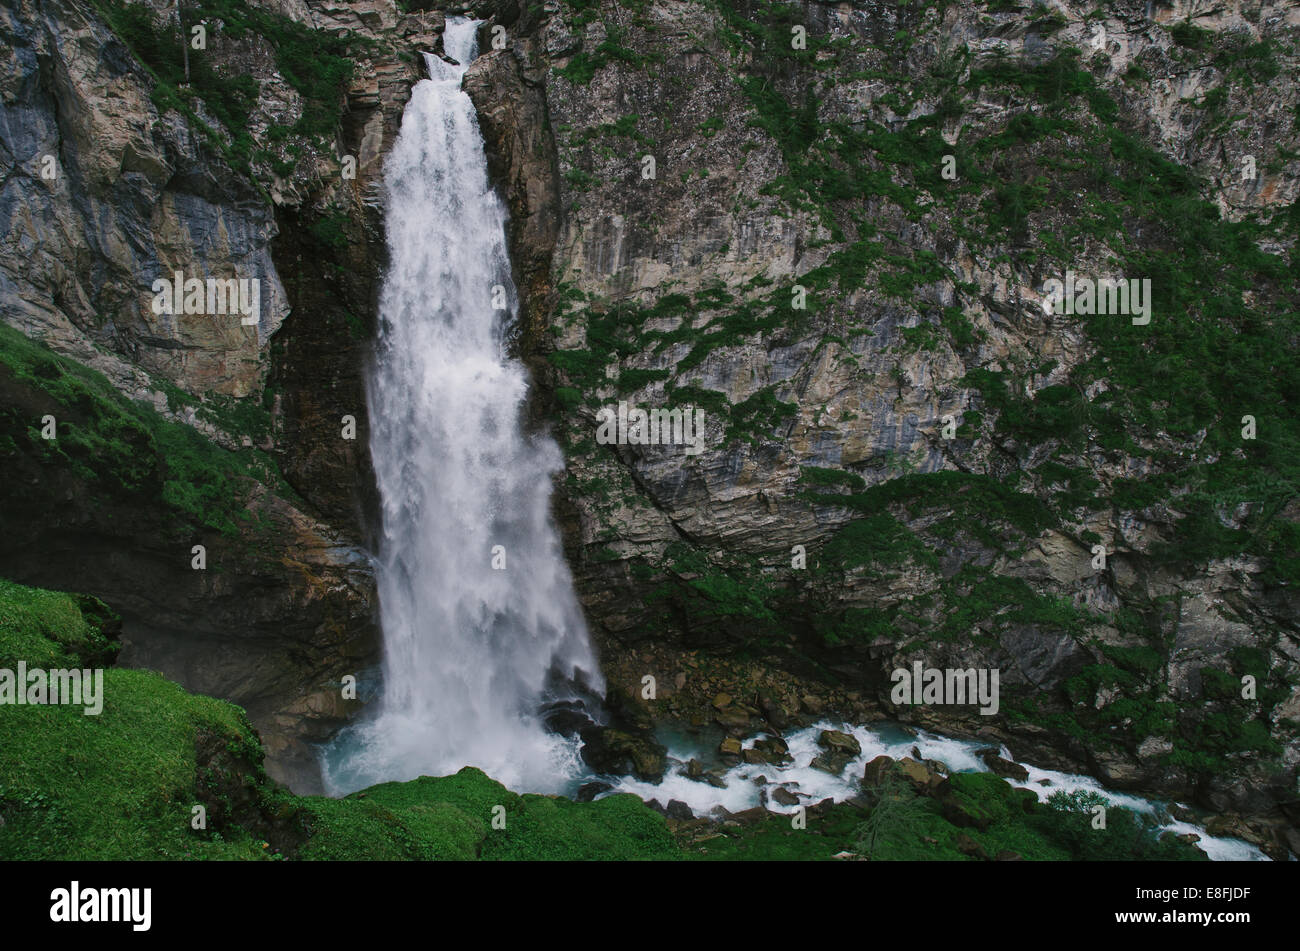 Rural landscape with waterfall Stock Photo